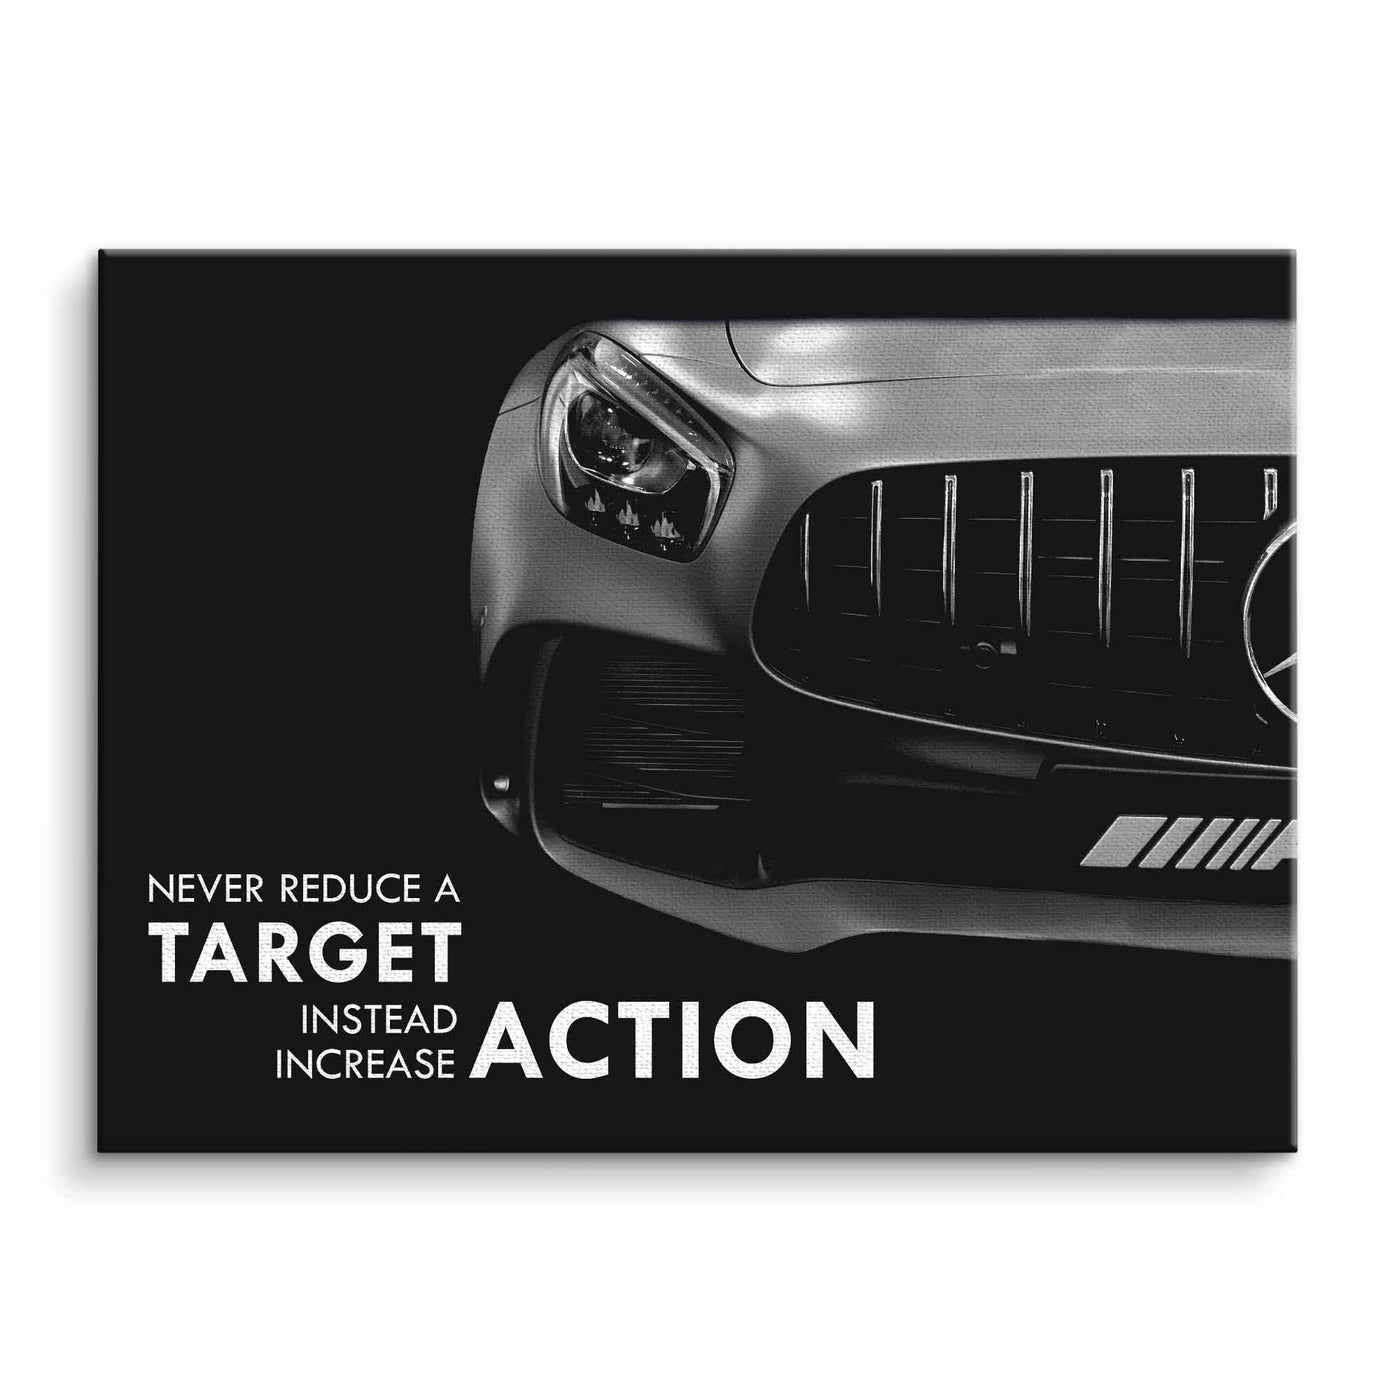 Increase Action